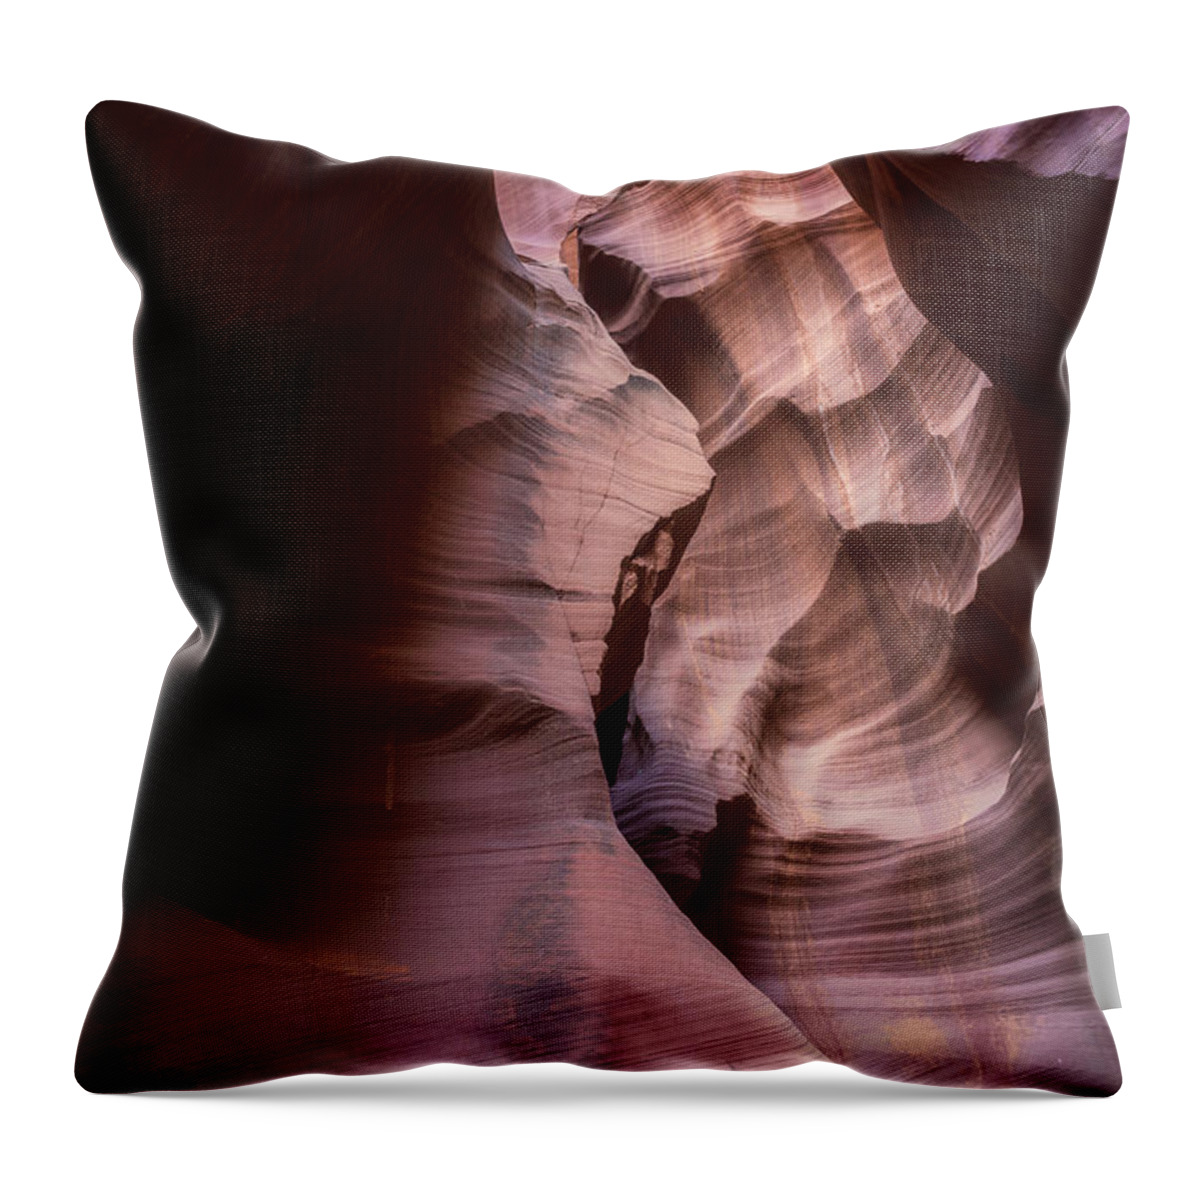 Abstract Throw Pillow featuring the photograph Slot Canyon -3 by Alex Mironyuk